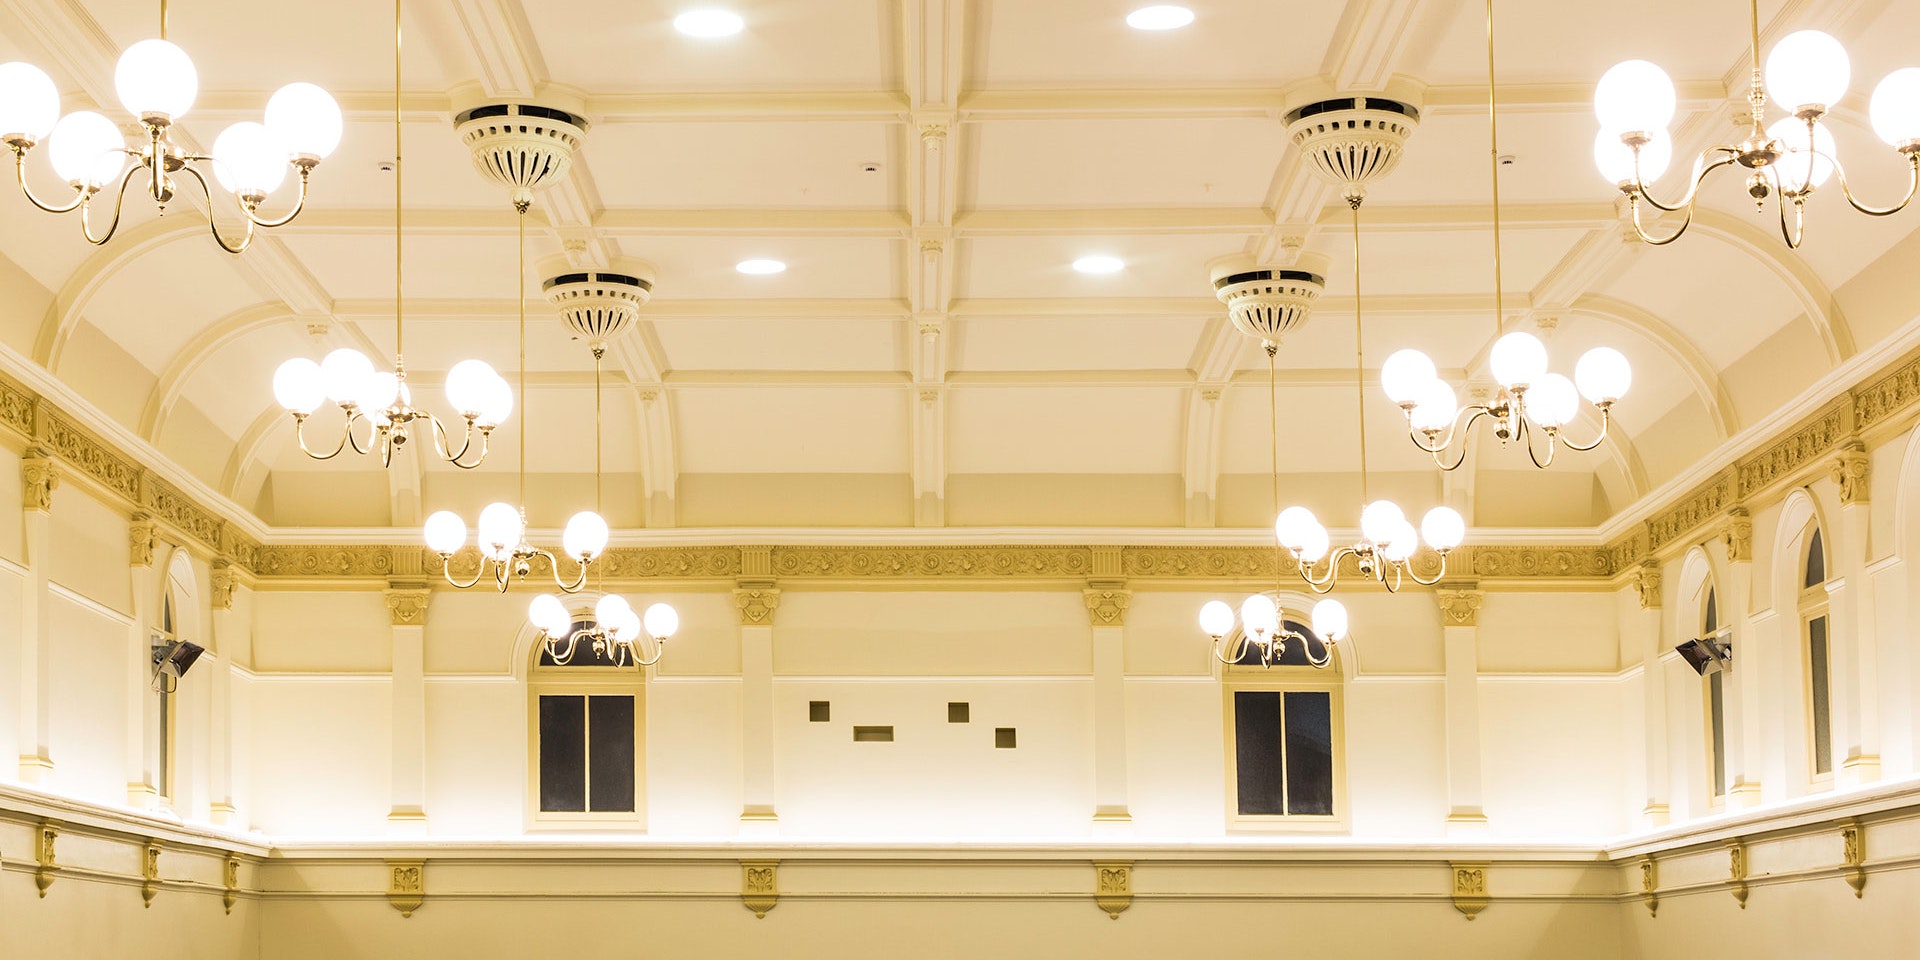 Multo versatile, compact LED strip in application, installed in the Kensington Town Hall.